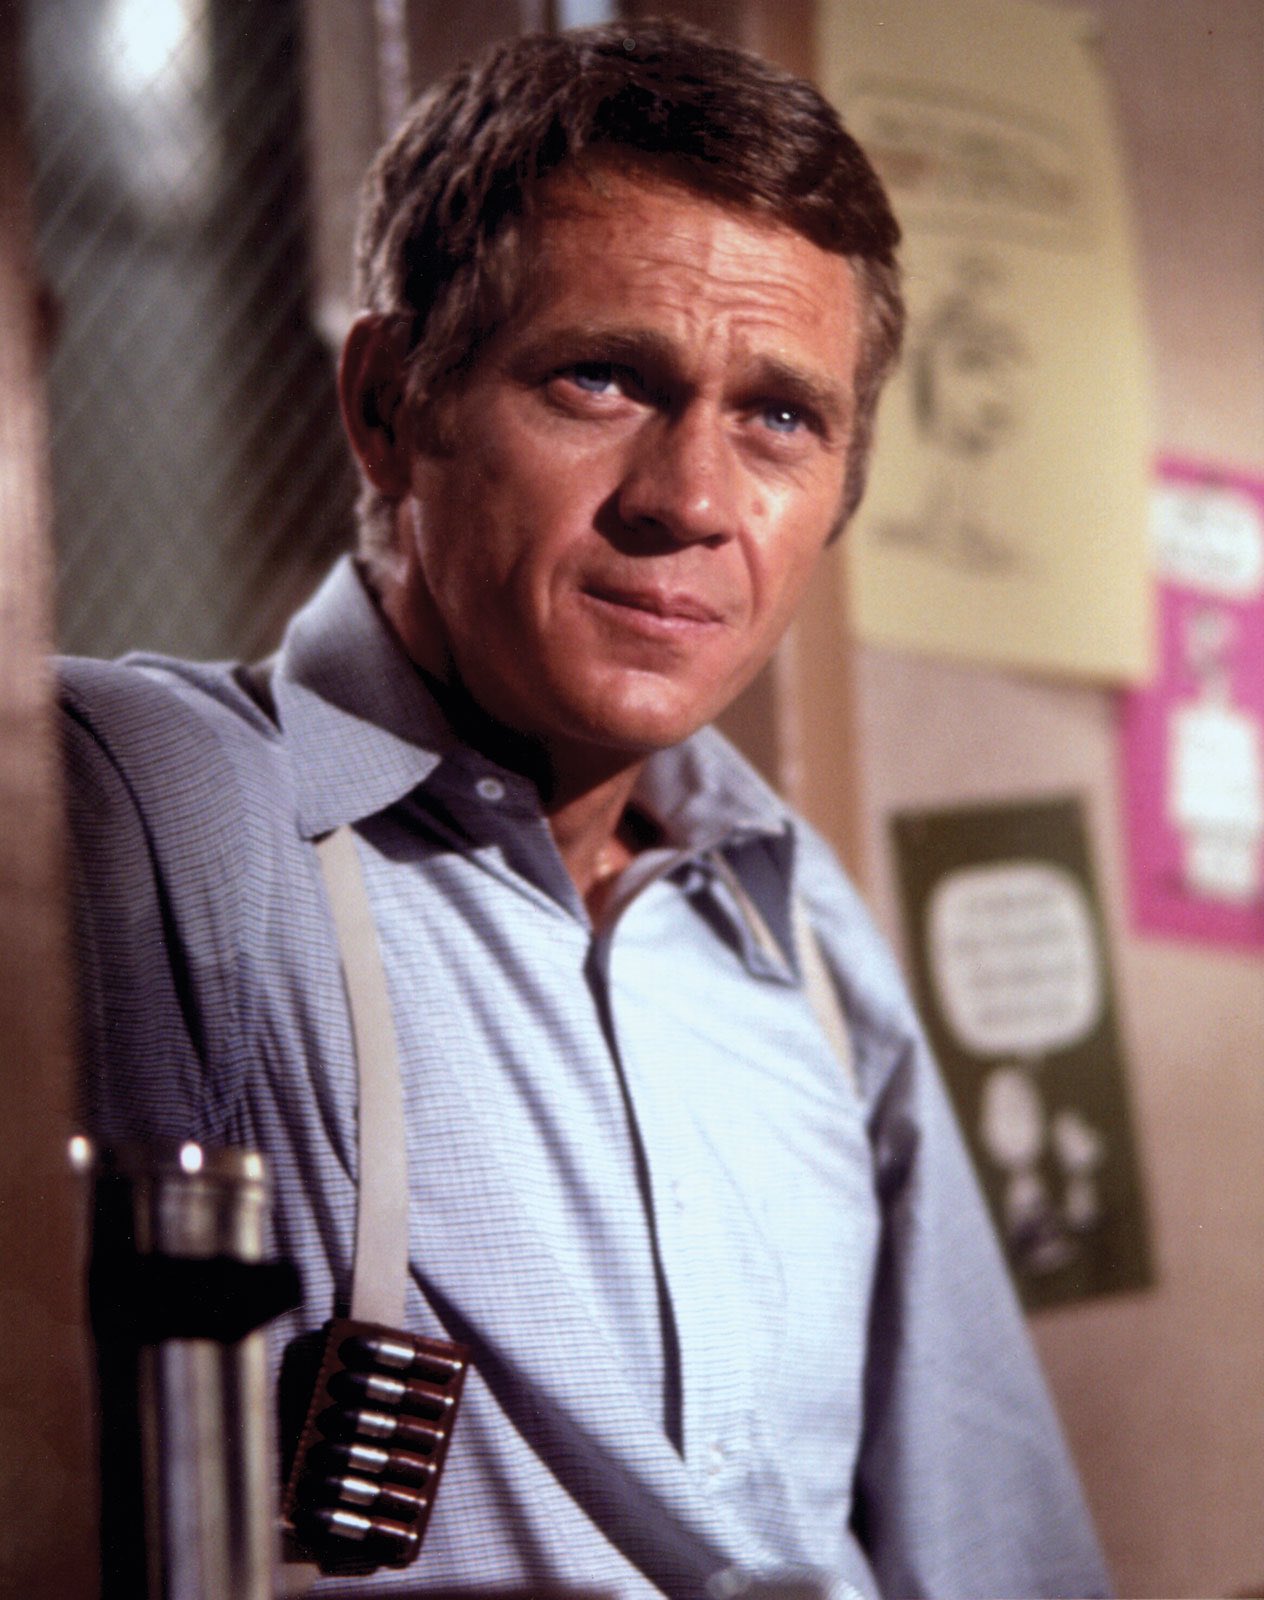 Happy birthday to the King of Cool, Beech Grove s own Steve McQueen! Born this day in 1930. 